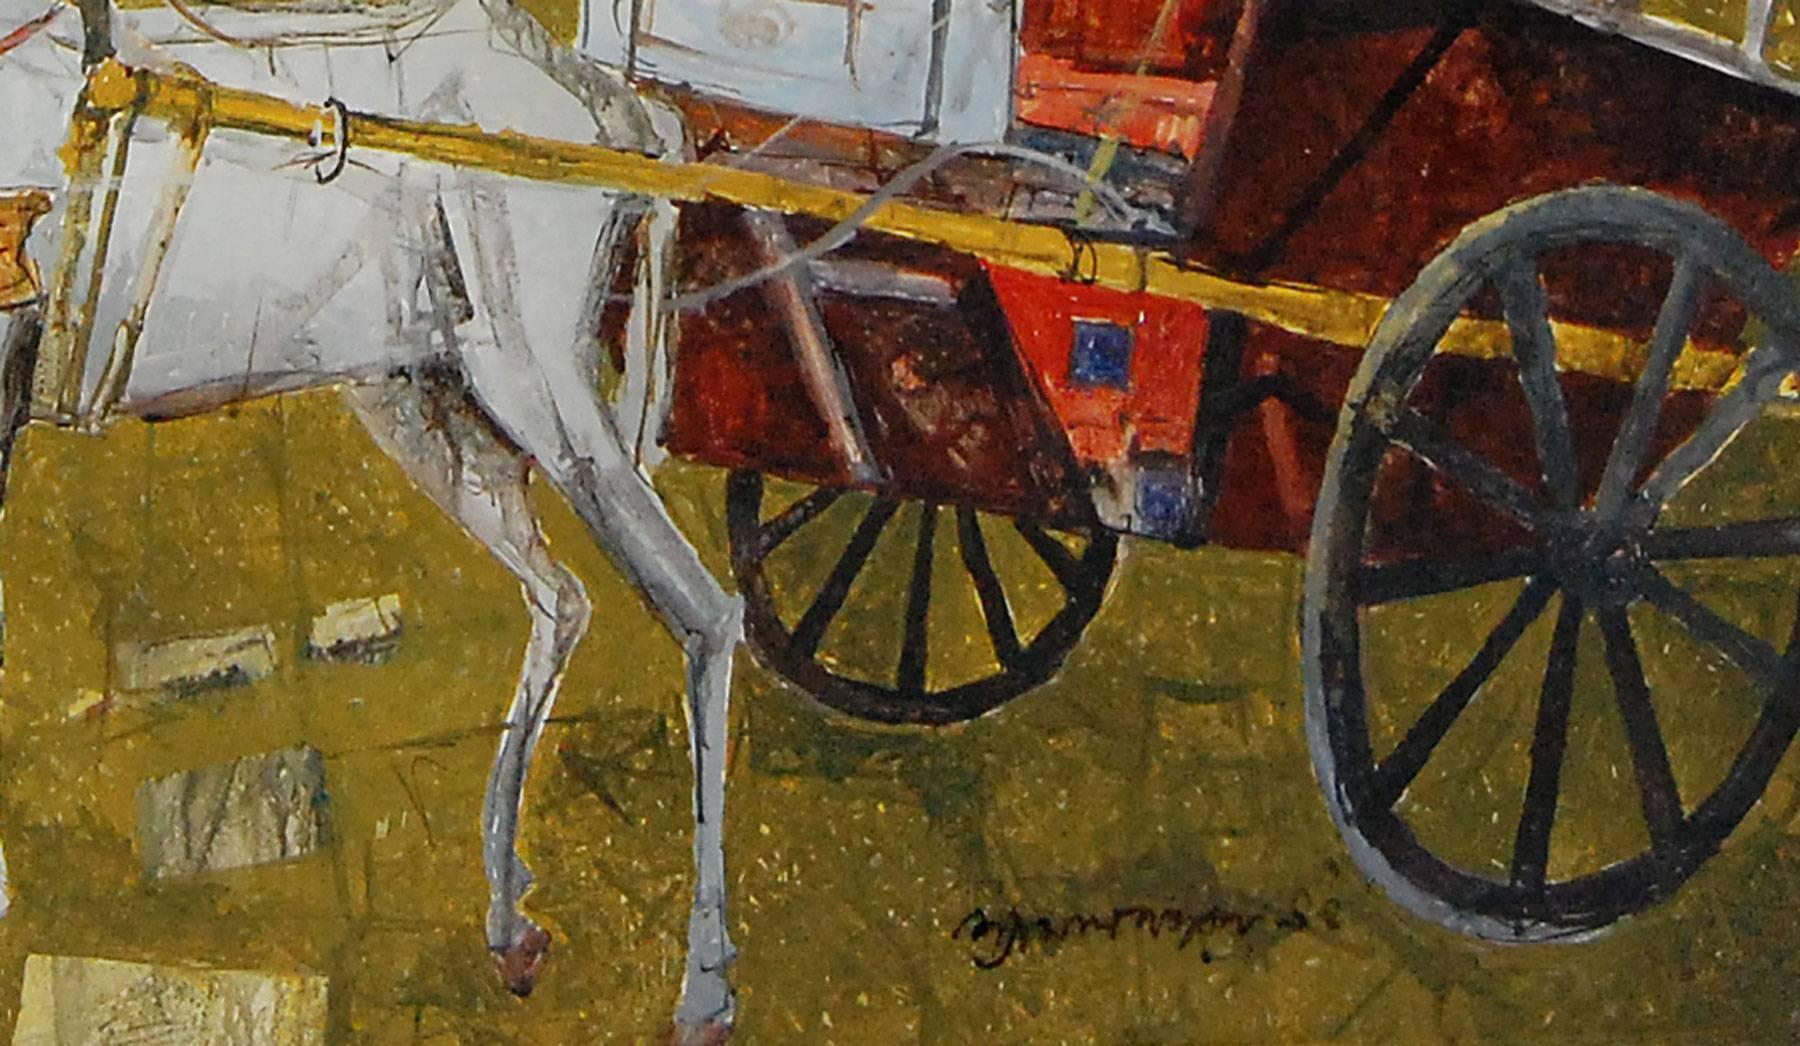 Temple and Chariot: City life of Calcutta, surrealism, bright yellow, red, white - Painting by Shyamal Dutta Ray